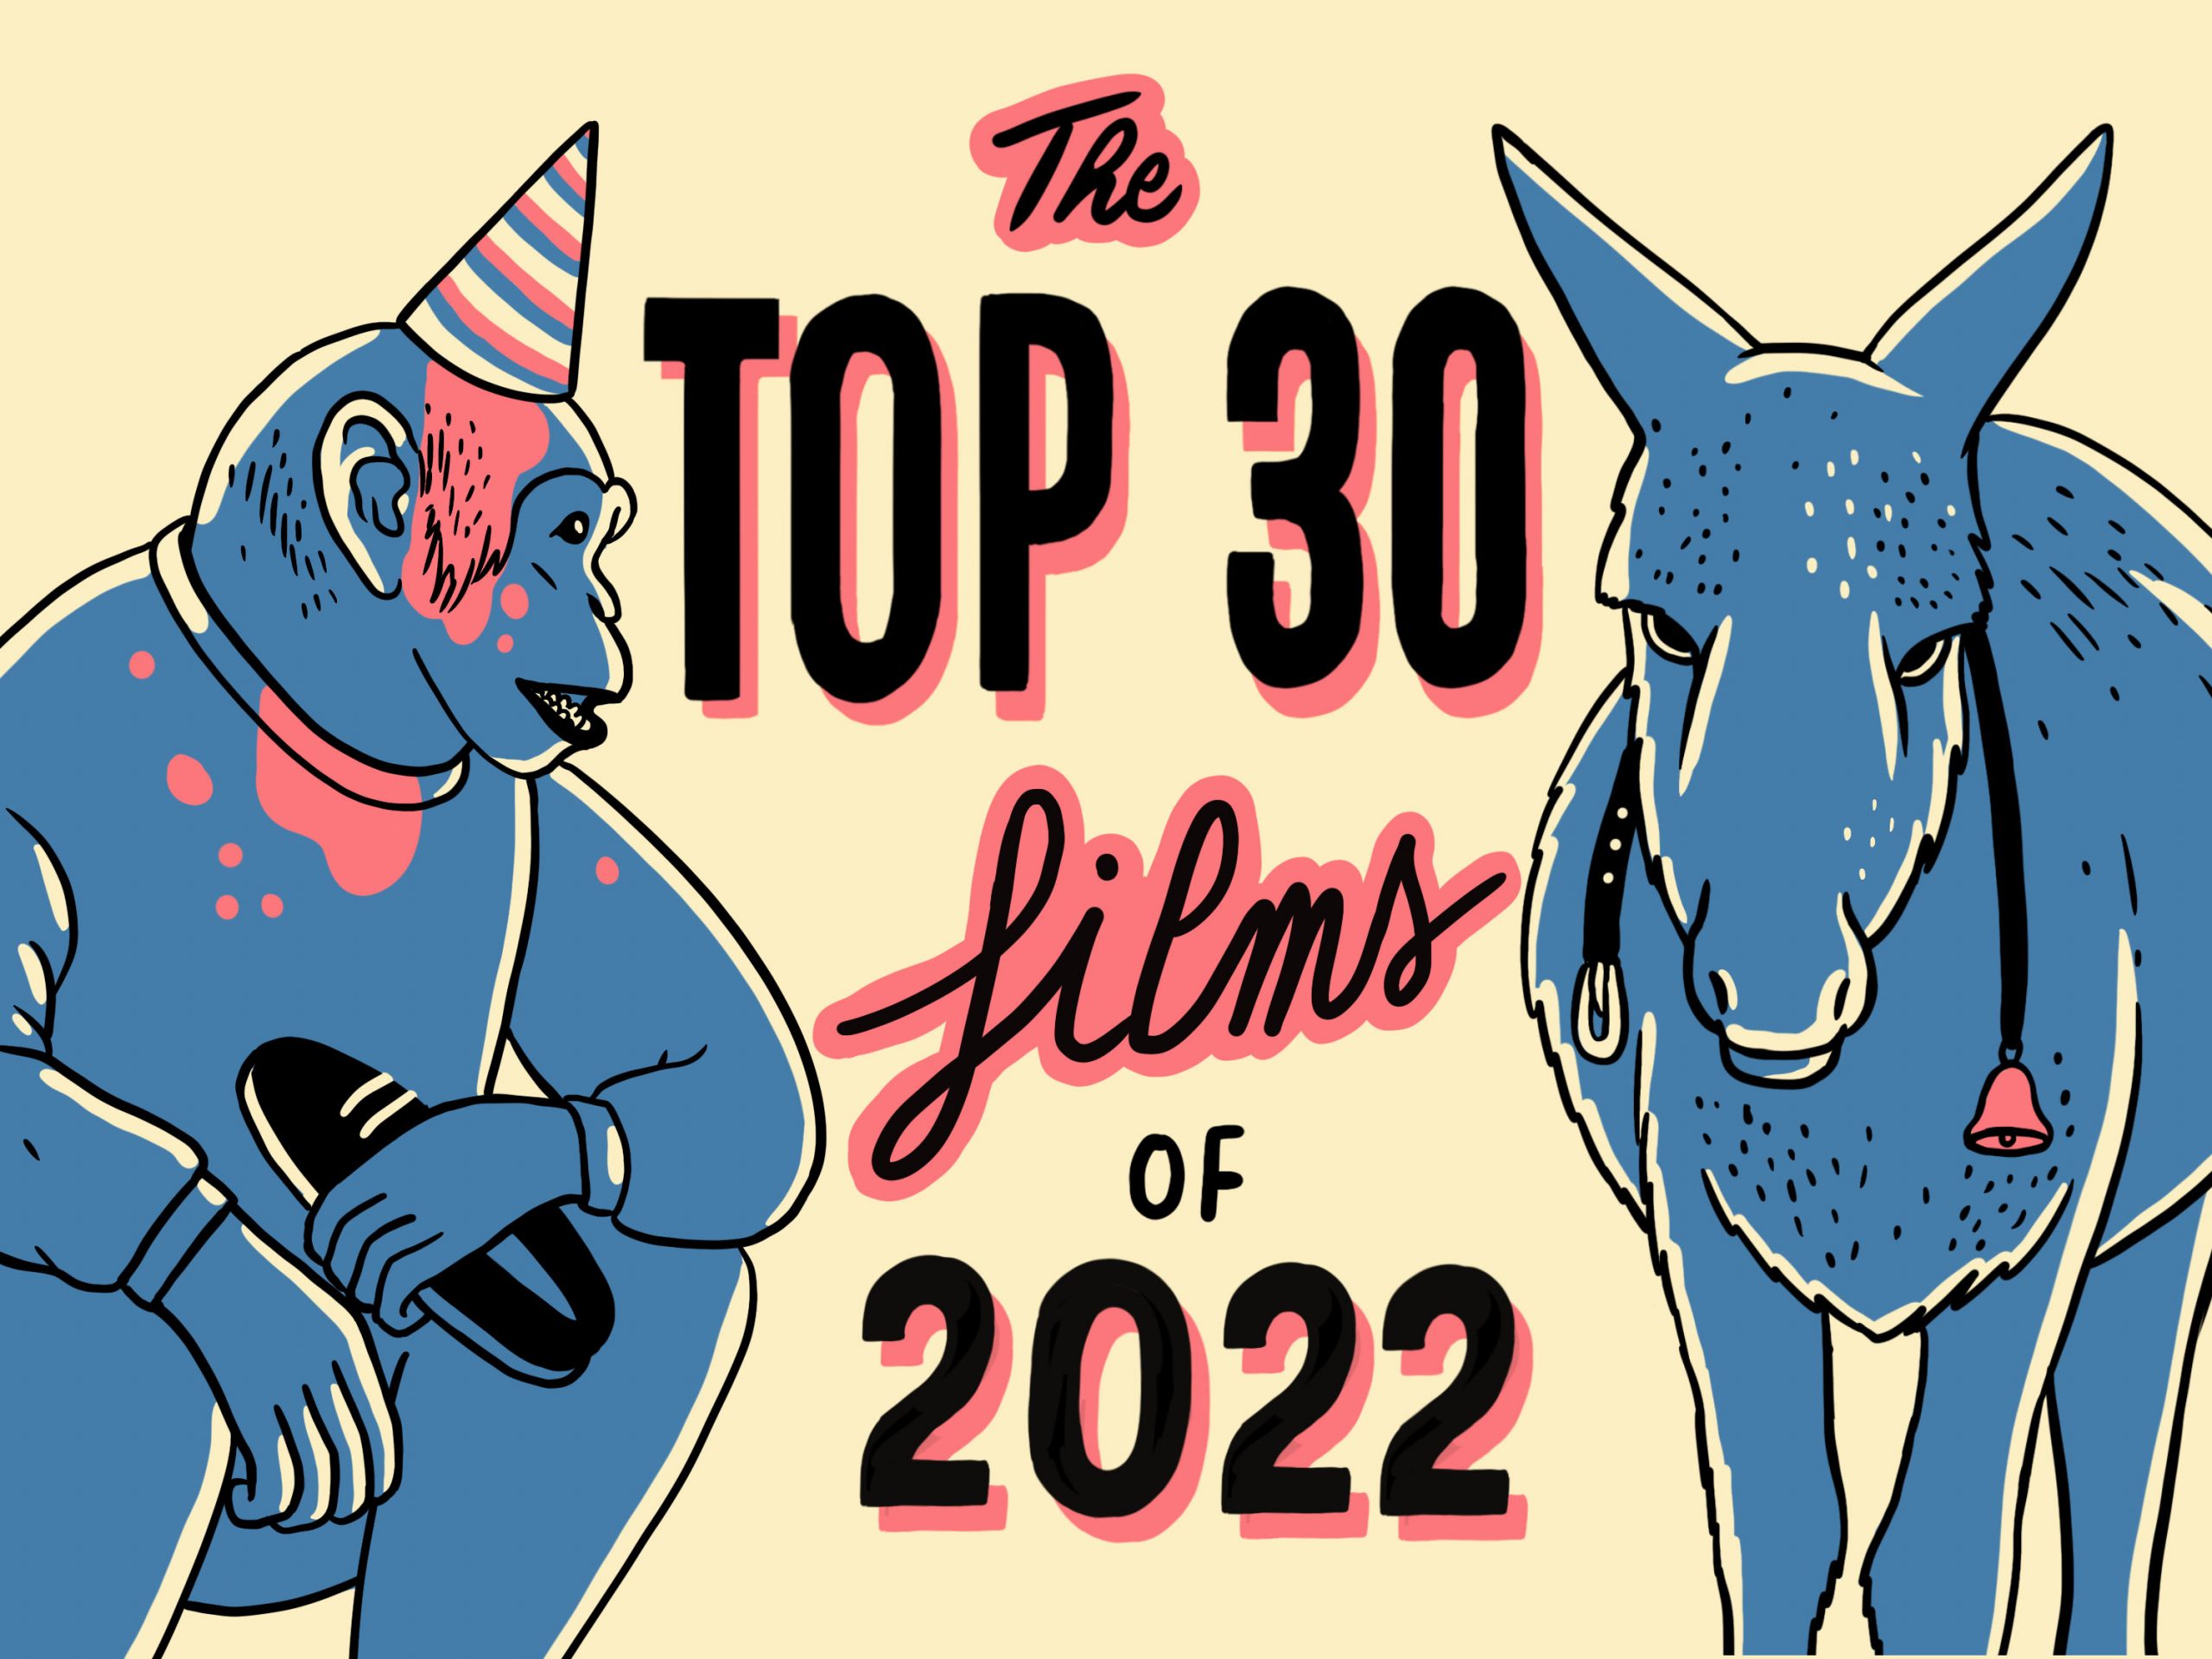 The 30 best films of 2022